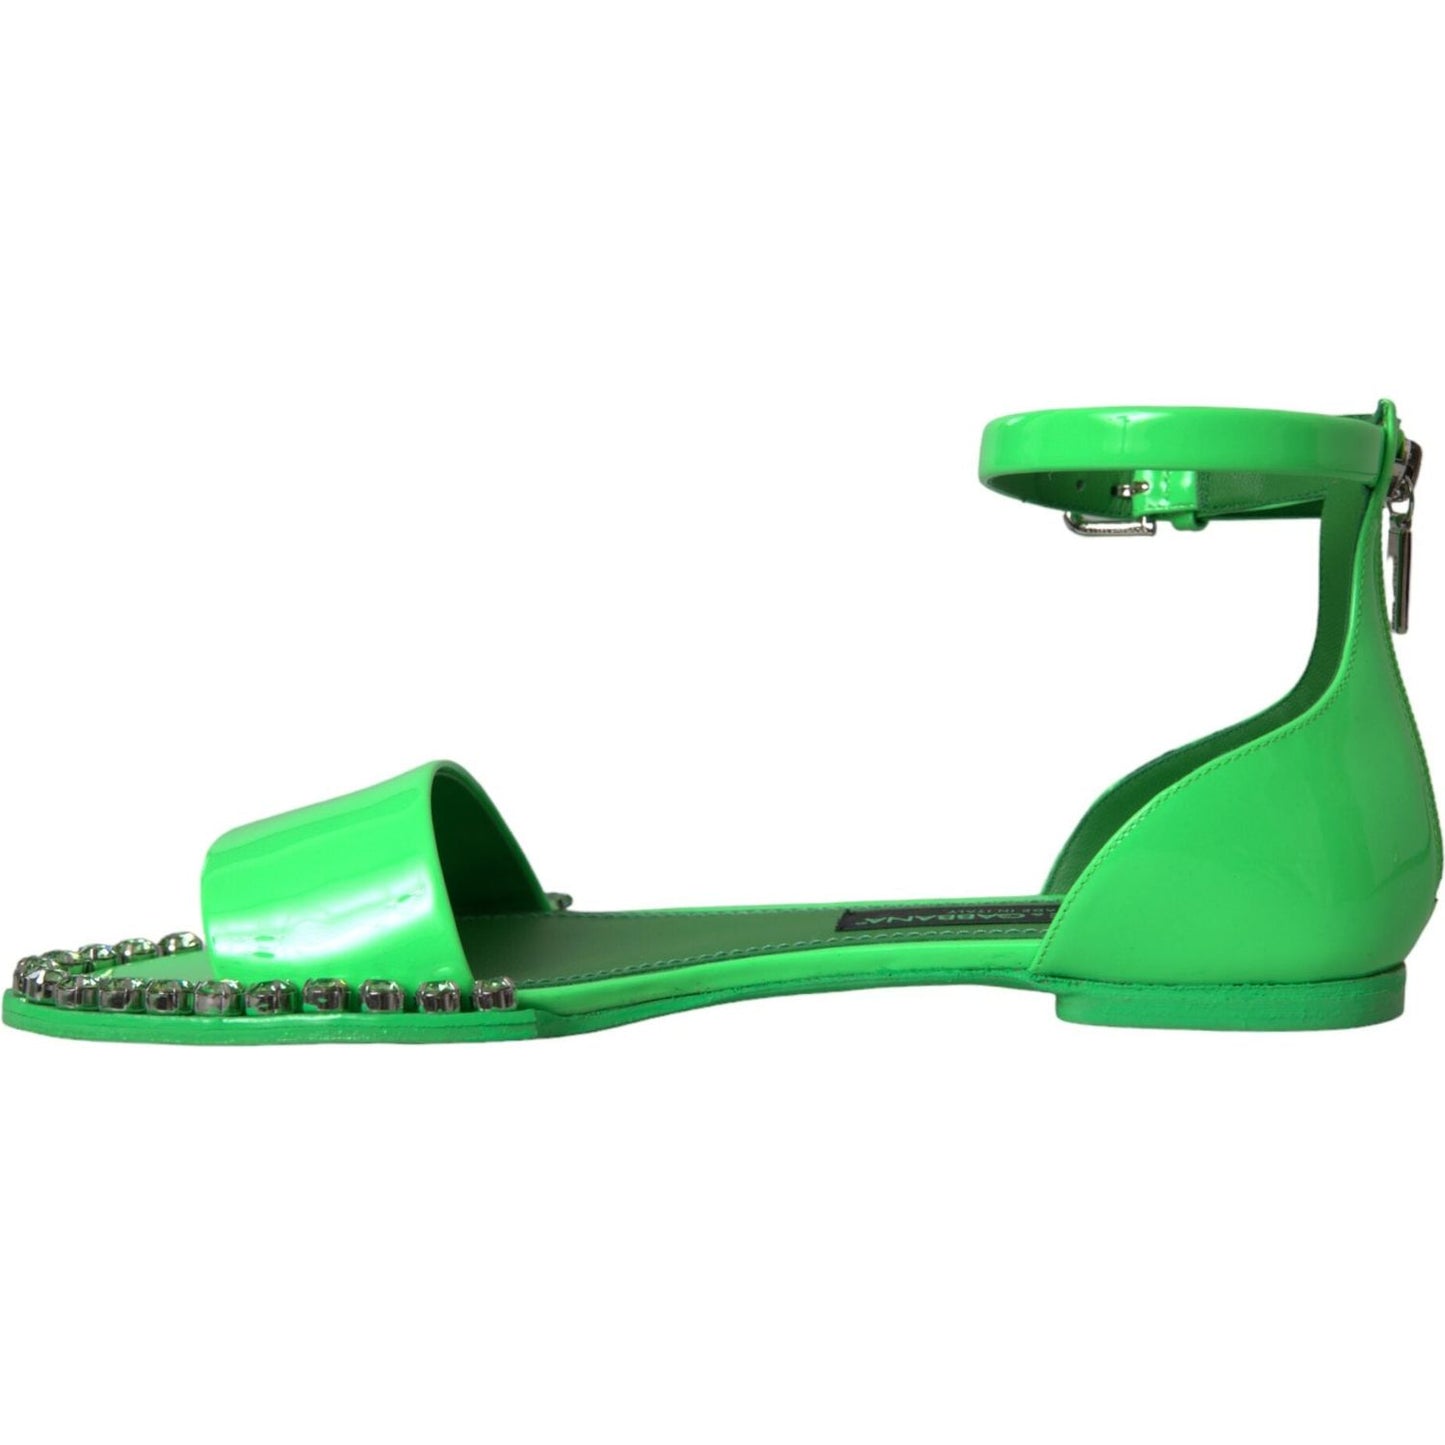 Dolce & Gabbana Neon Green Crystal Ankle Strap Sandals Shoes neon-green-crystal-ankle-strap-sandals-shoes